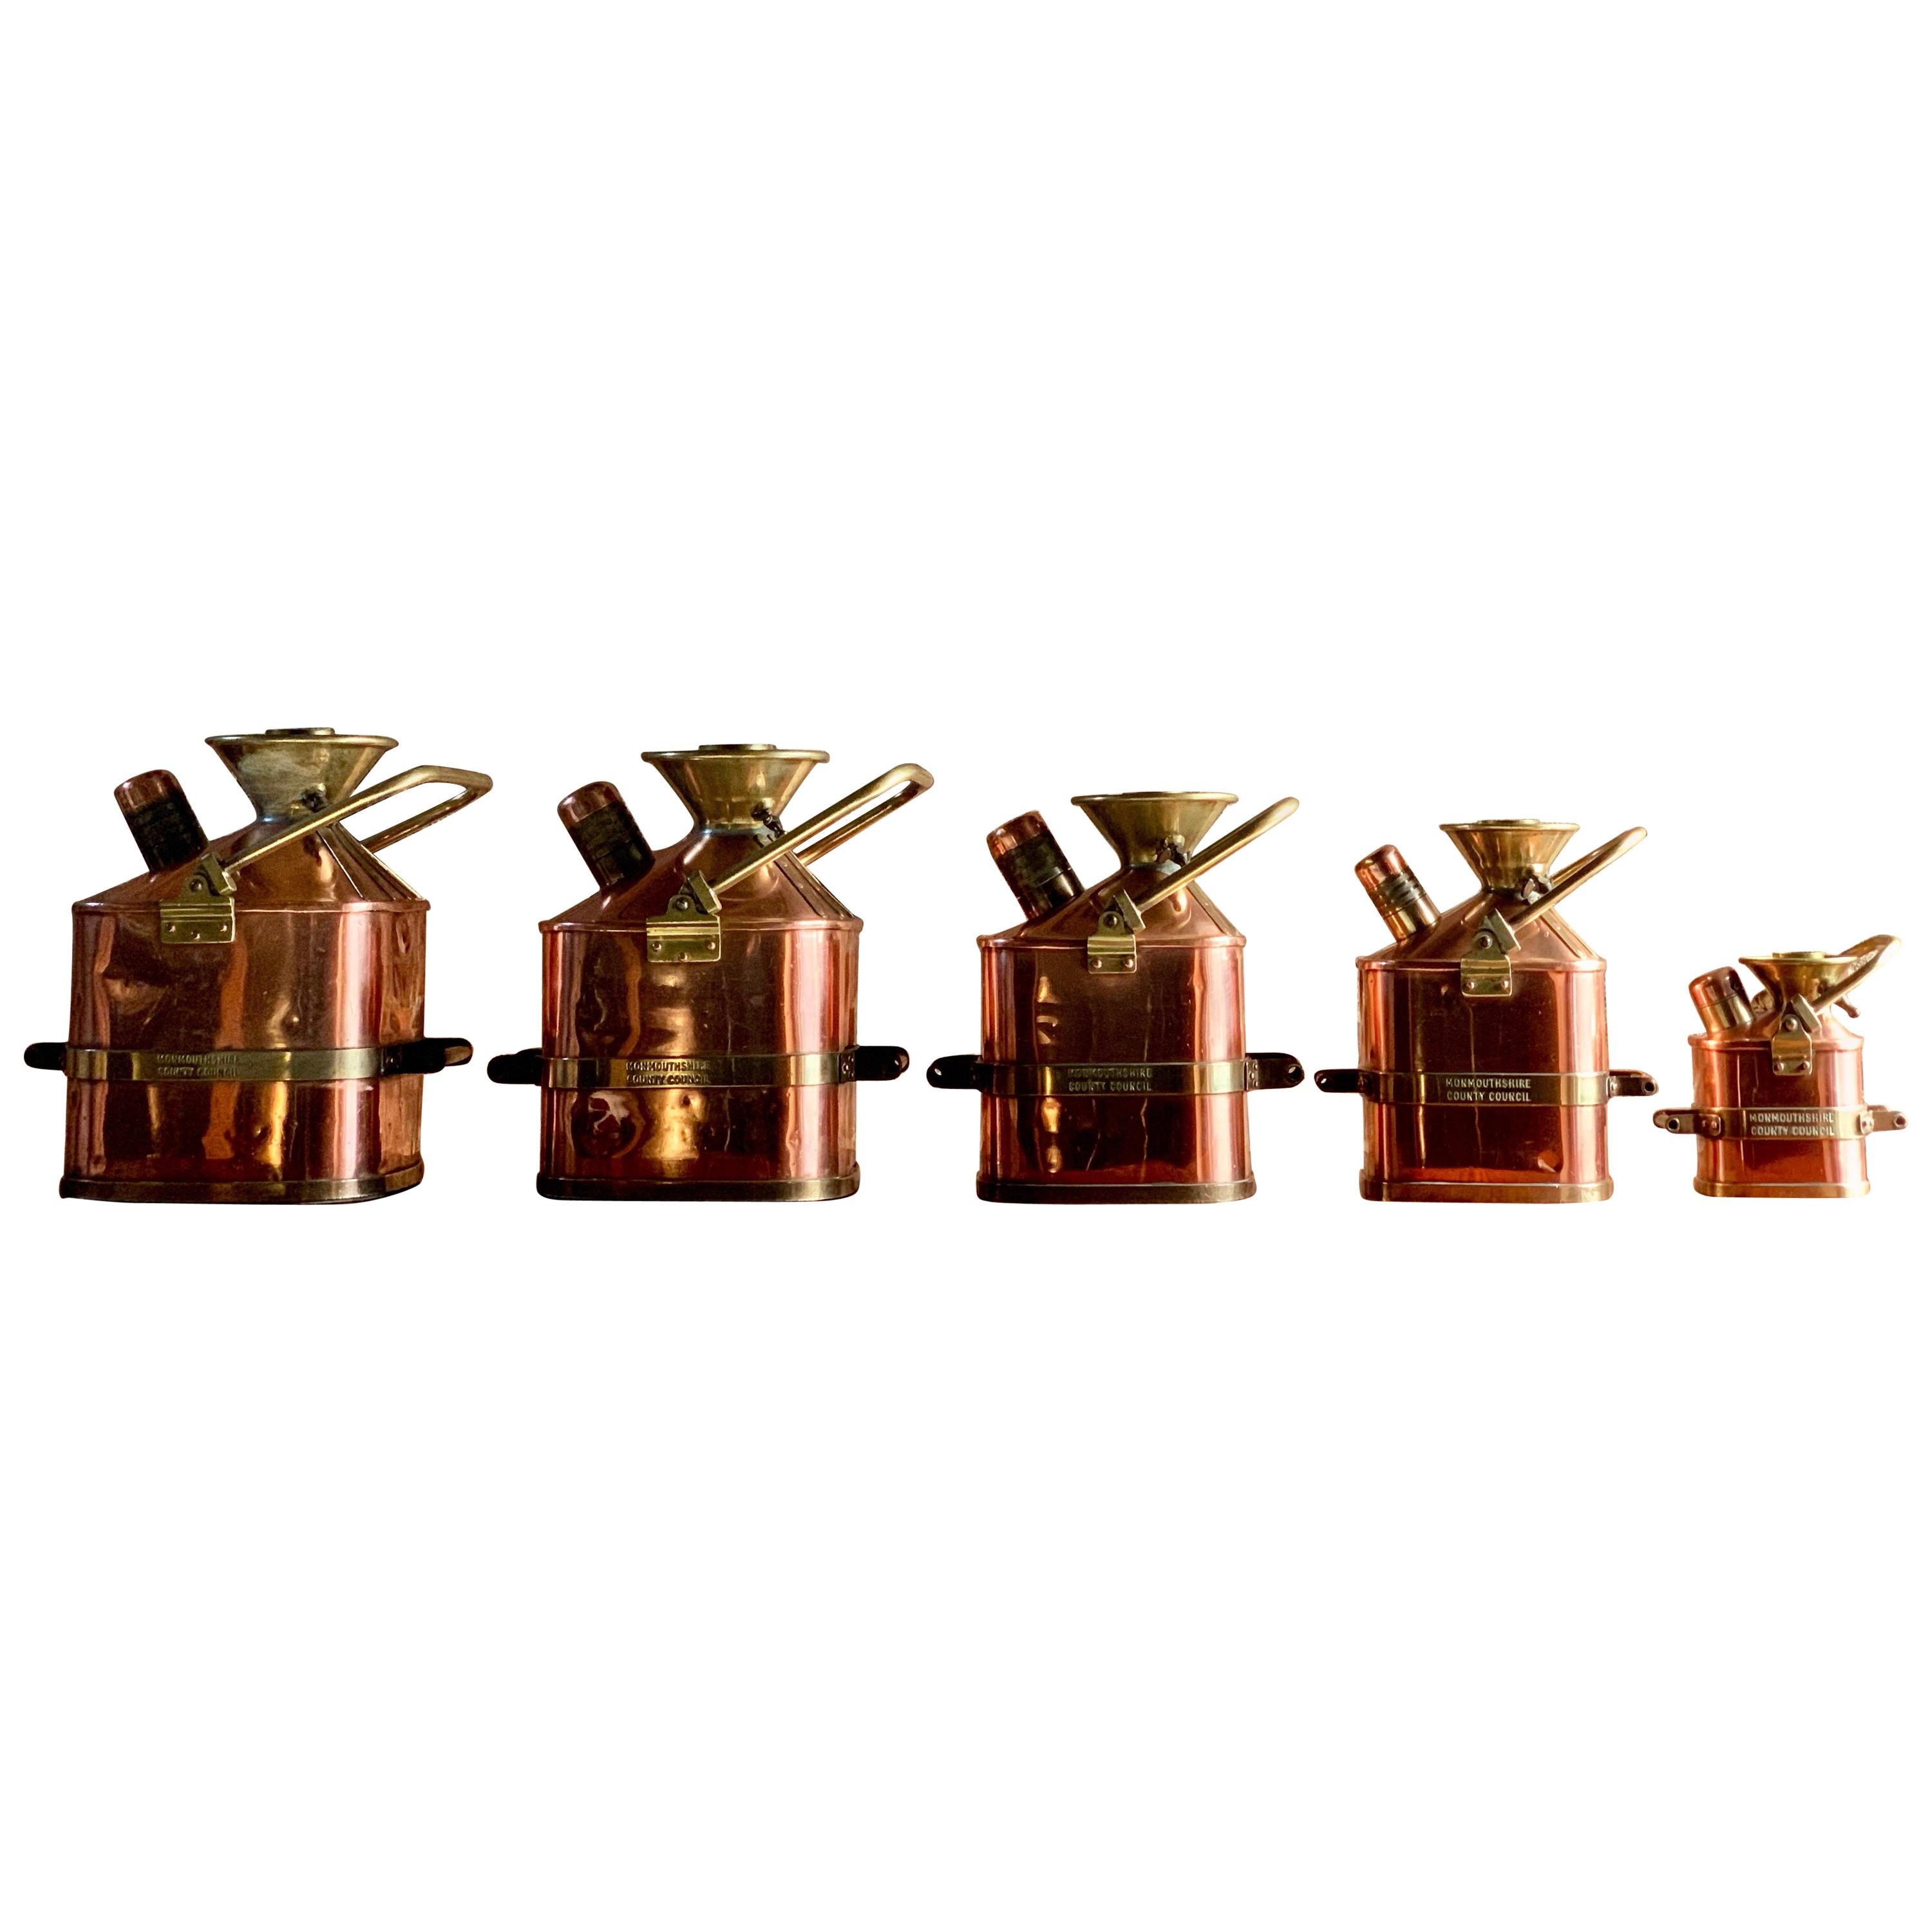 Monmouthshire County Council Petrol Measuring Cans Set of 5 Copper & Brass, 1931